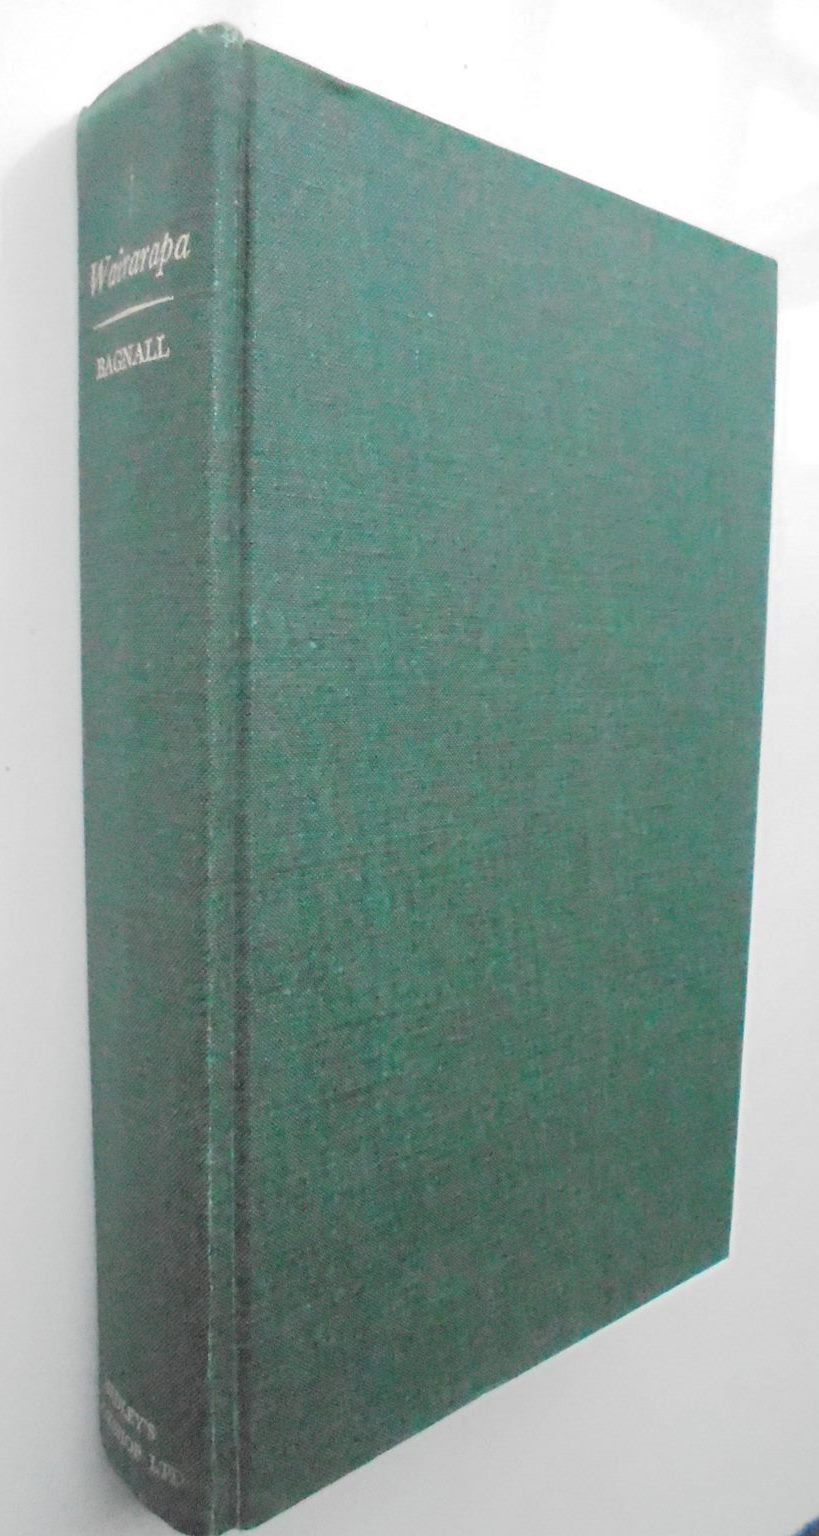 Wairarapa: An Historical Excursion - by A. G. Bagnall. [First Edition]